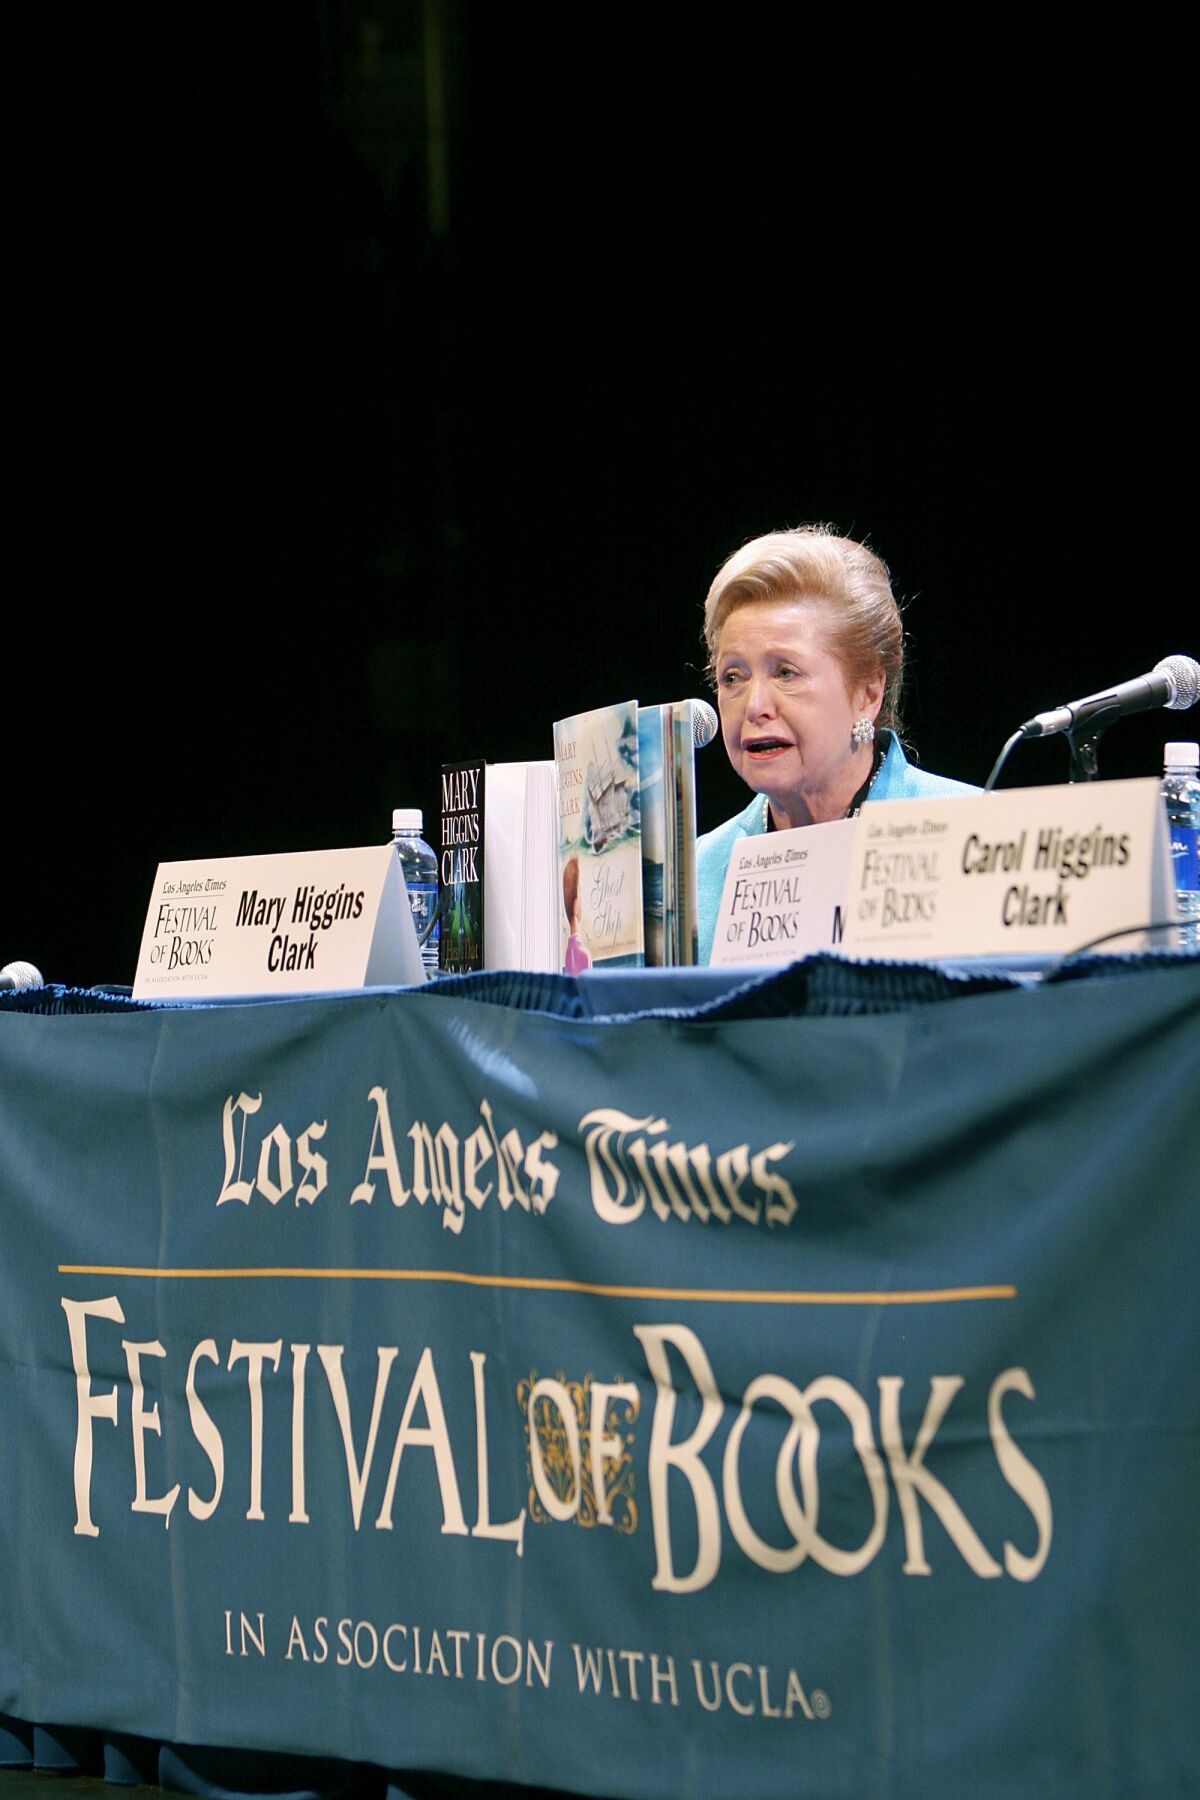 Mary Higgins Clark participates in a panel at the 12th Annual L.A. Times Festival of Books at Royce Hall on the UCLA campus on April 28, 2007.